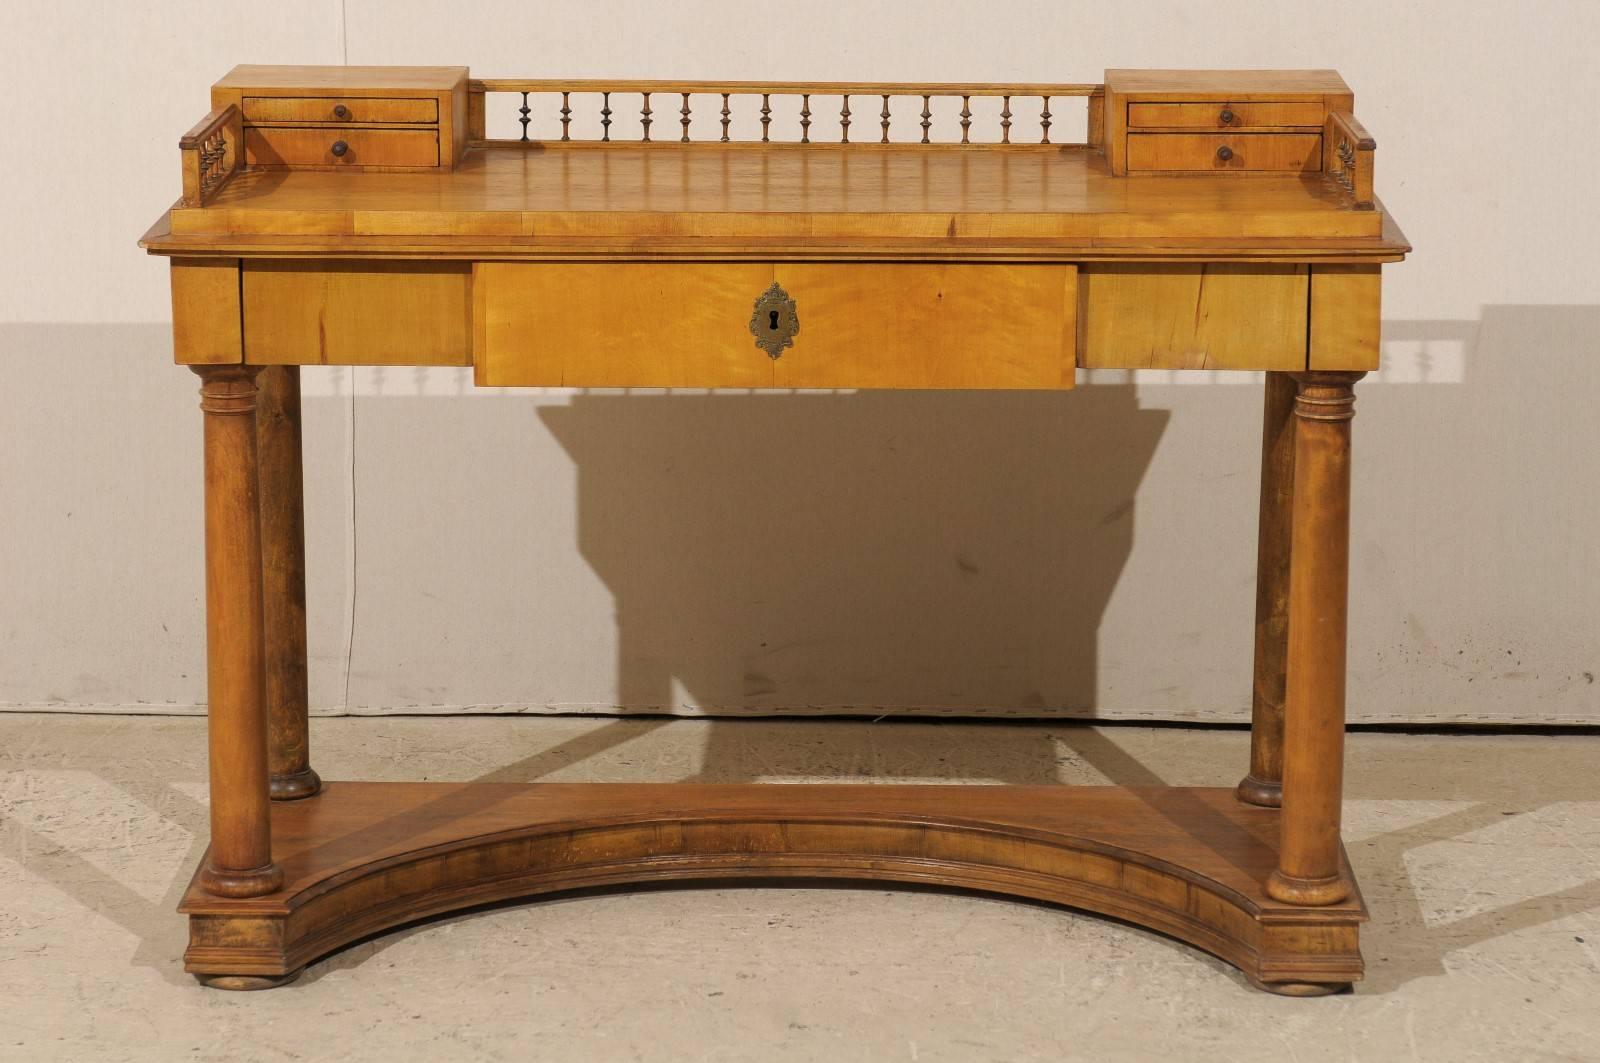 A Swedish 19th century Karl Johan period birch wood desk. This Swedish desk from circa 1830 features a writing area decorated with two small size drawers flanking a small open gallery reminiscent of turned spindles, also delimiting the area on both